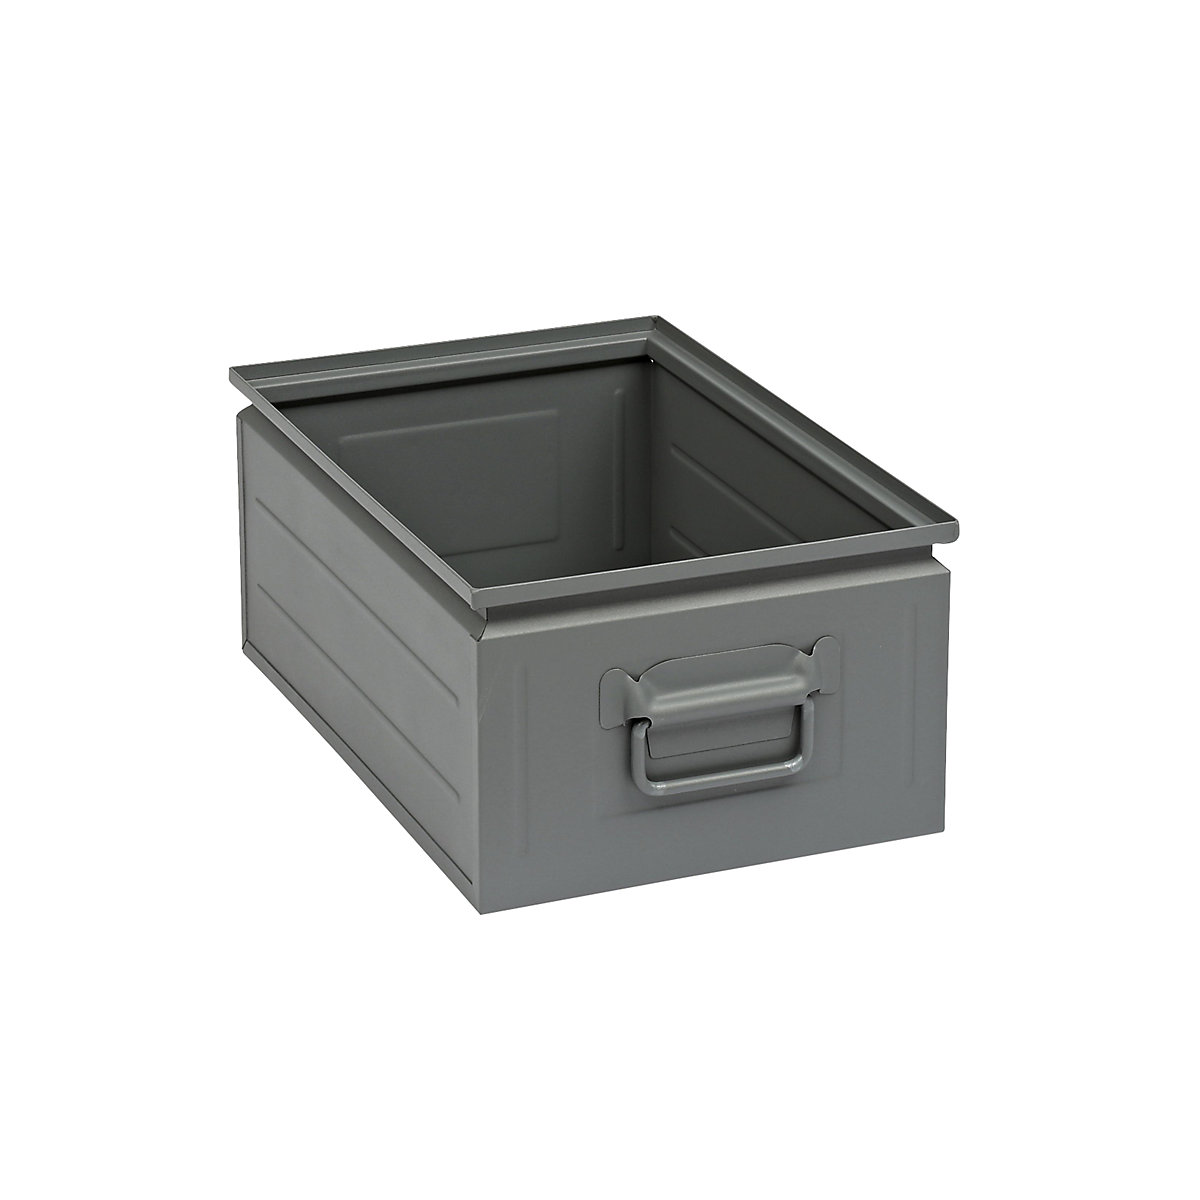 Stacking container made of sheet steel, capacity approx. 25 l, basalt grey RAL 7012